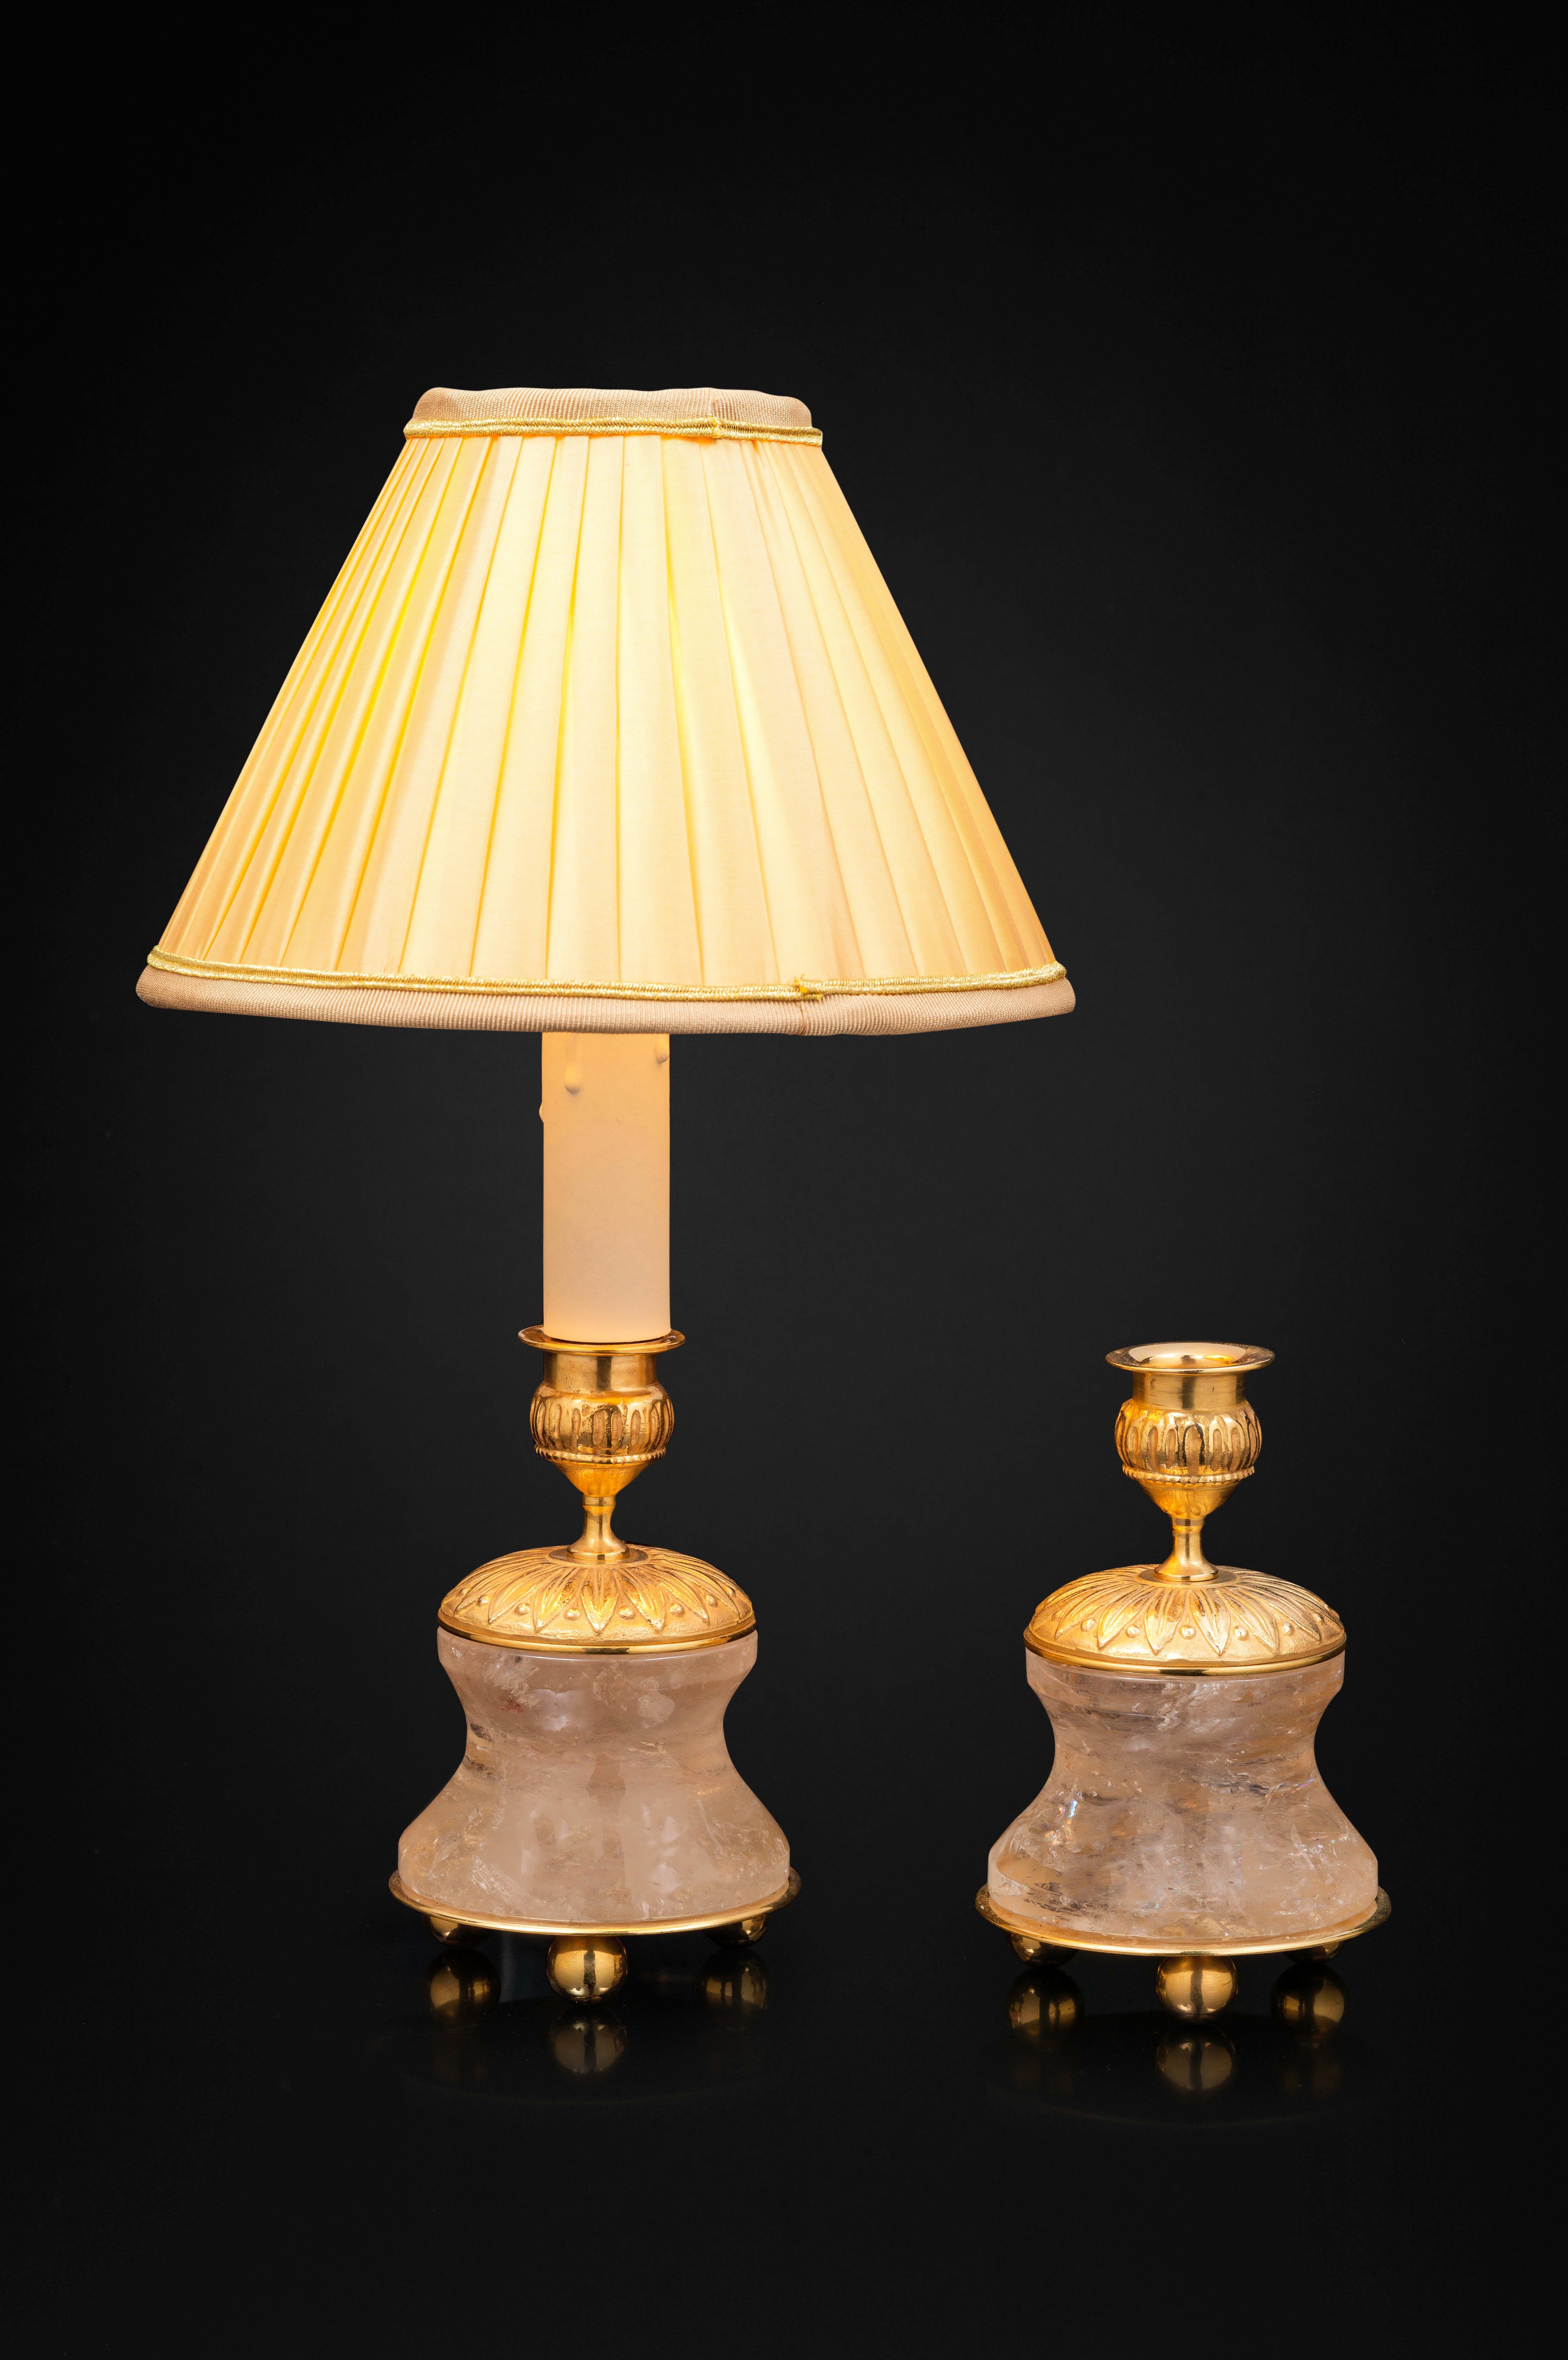 Amazing pair of rock crystal pair of lamps /candlesticks in the typic style of Louis XVI.
So you can used as you want, depend of your interiors and mood.
The base is carved in a single piece of rock crystal stone.
The top is made in France in